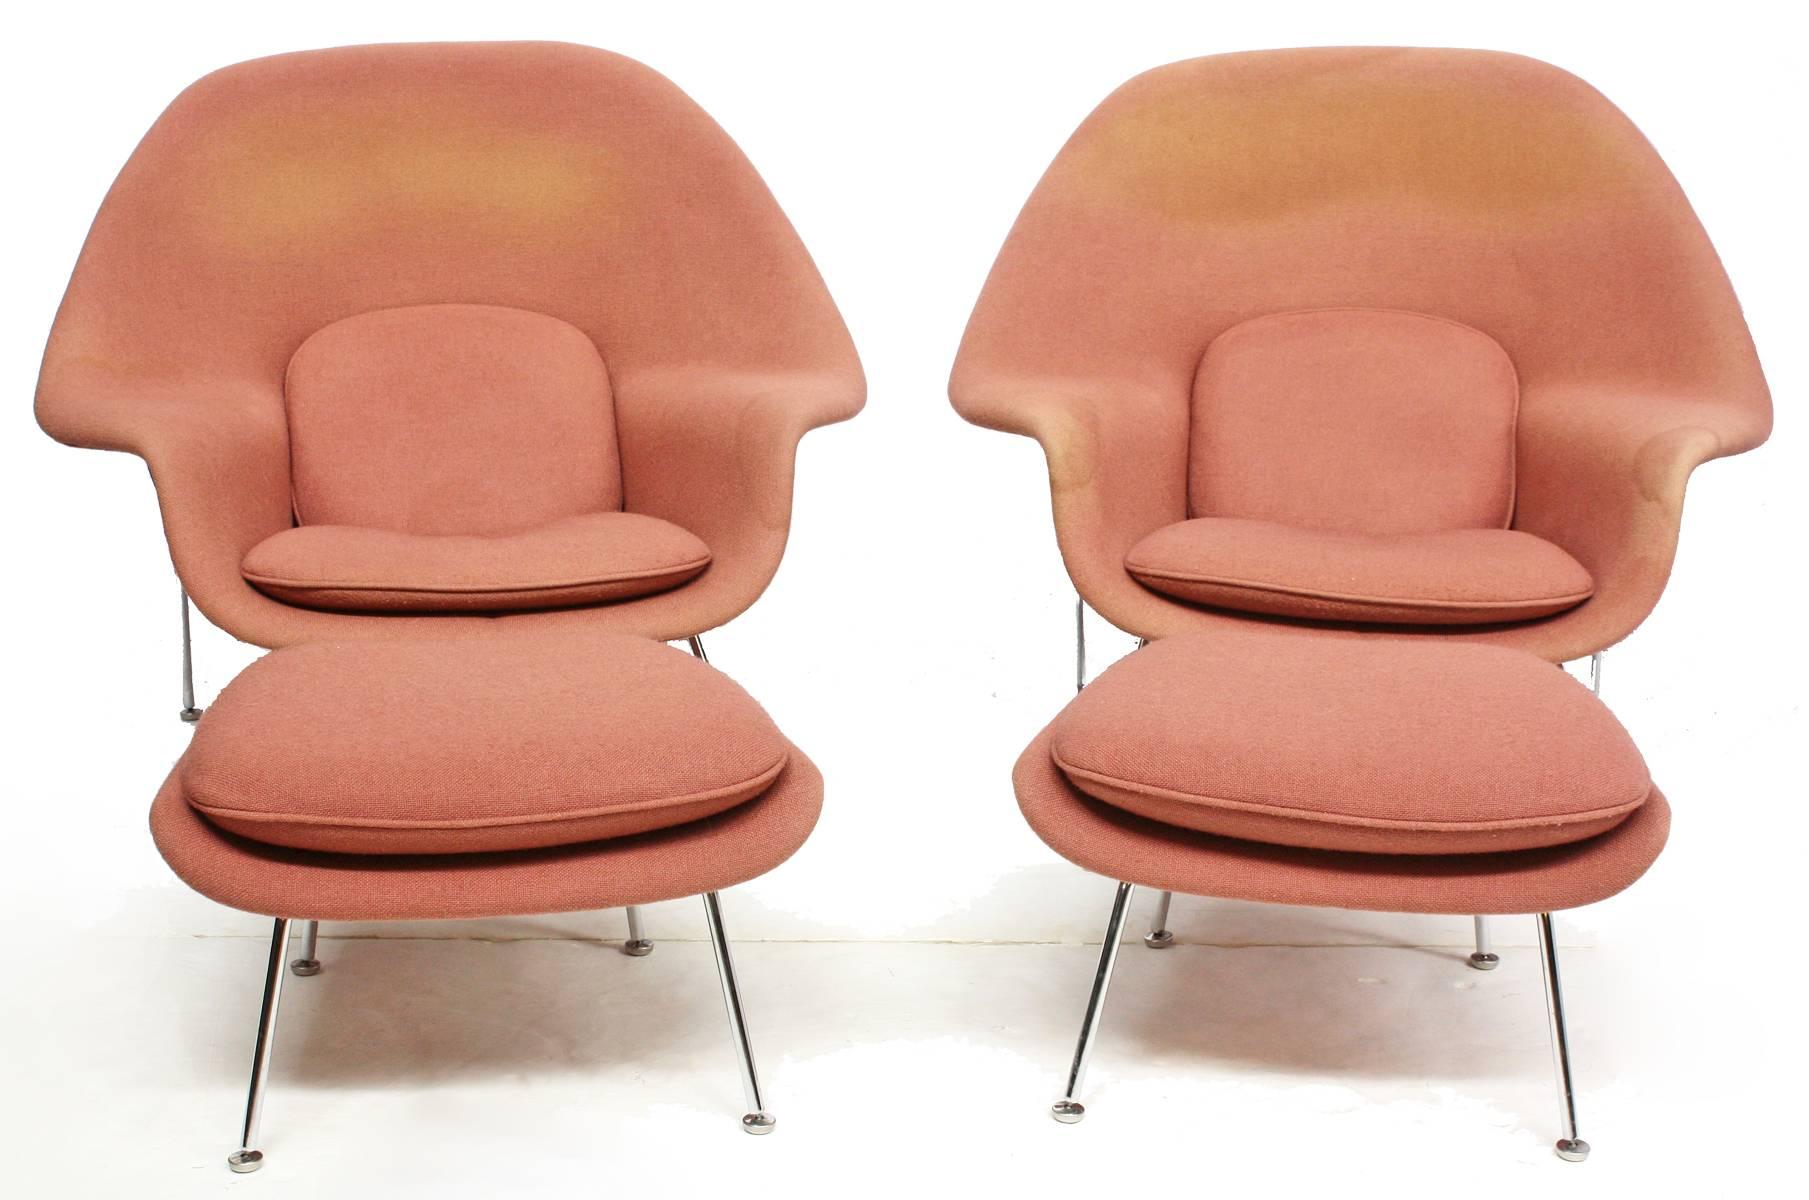 Pair of original womb chairs and ottomans designed by Eero Saarinen for Knoll. Chrome frame with original dusty rose upholstery. Knoll labels.

Ottoman dimensions: 15